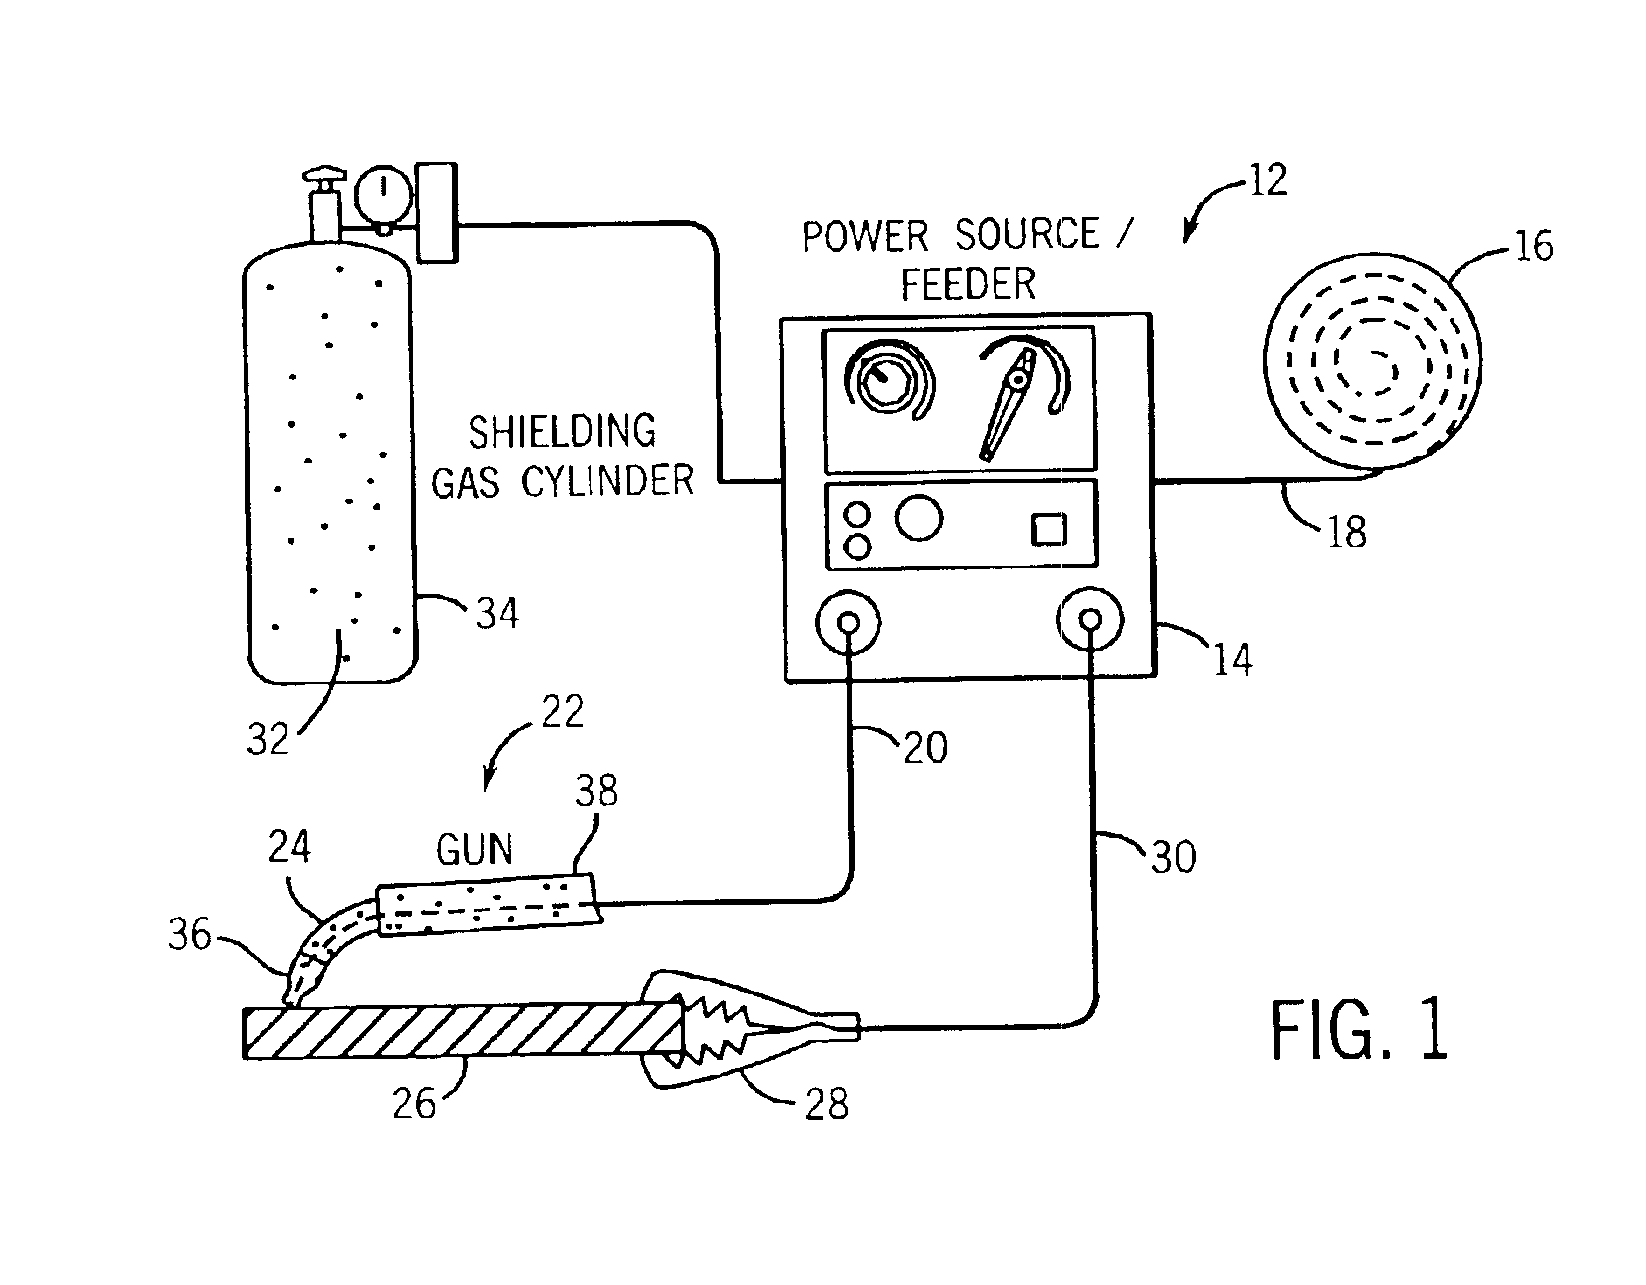 Triggerless welding implement and method of operating same